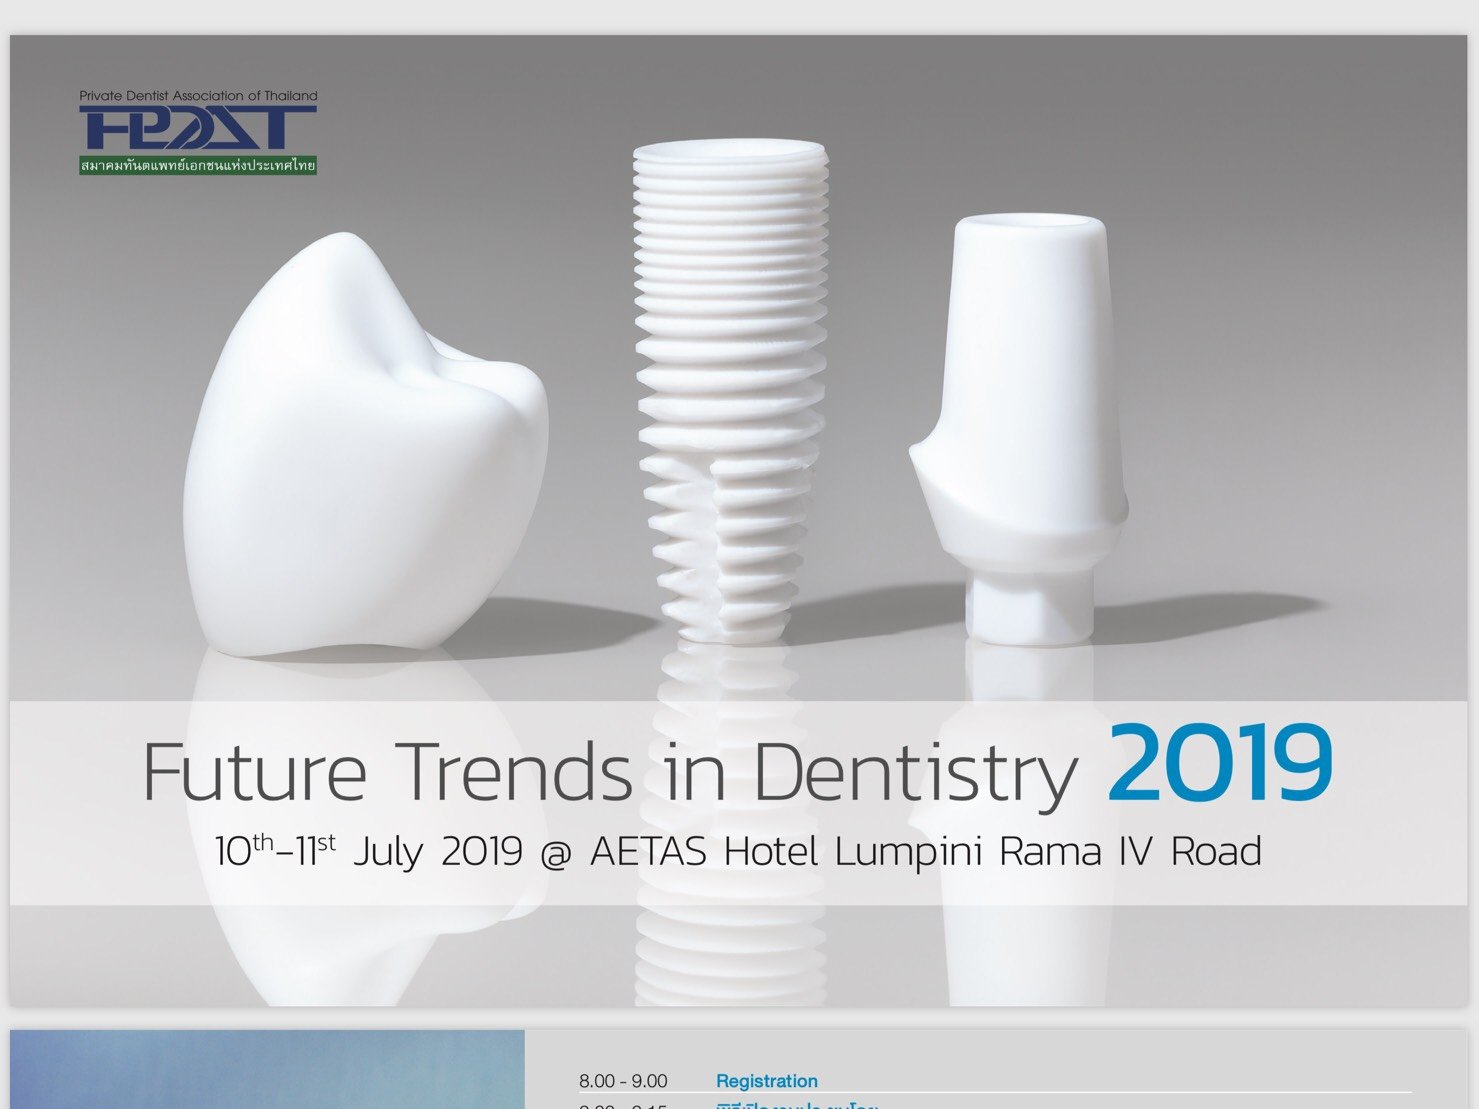 Future Trends in Dentistry 2019